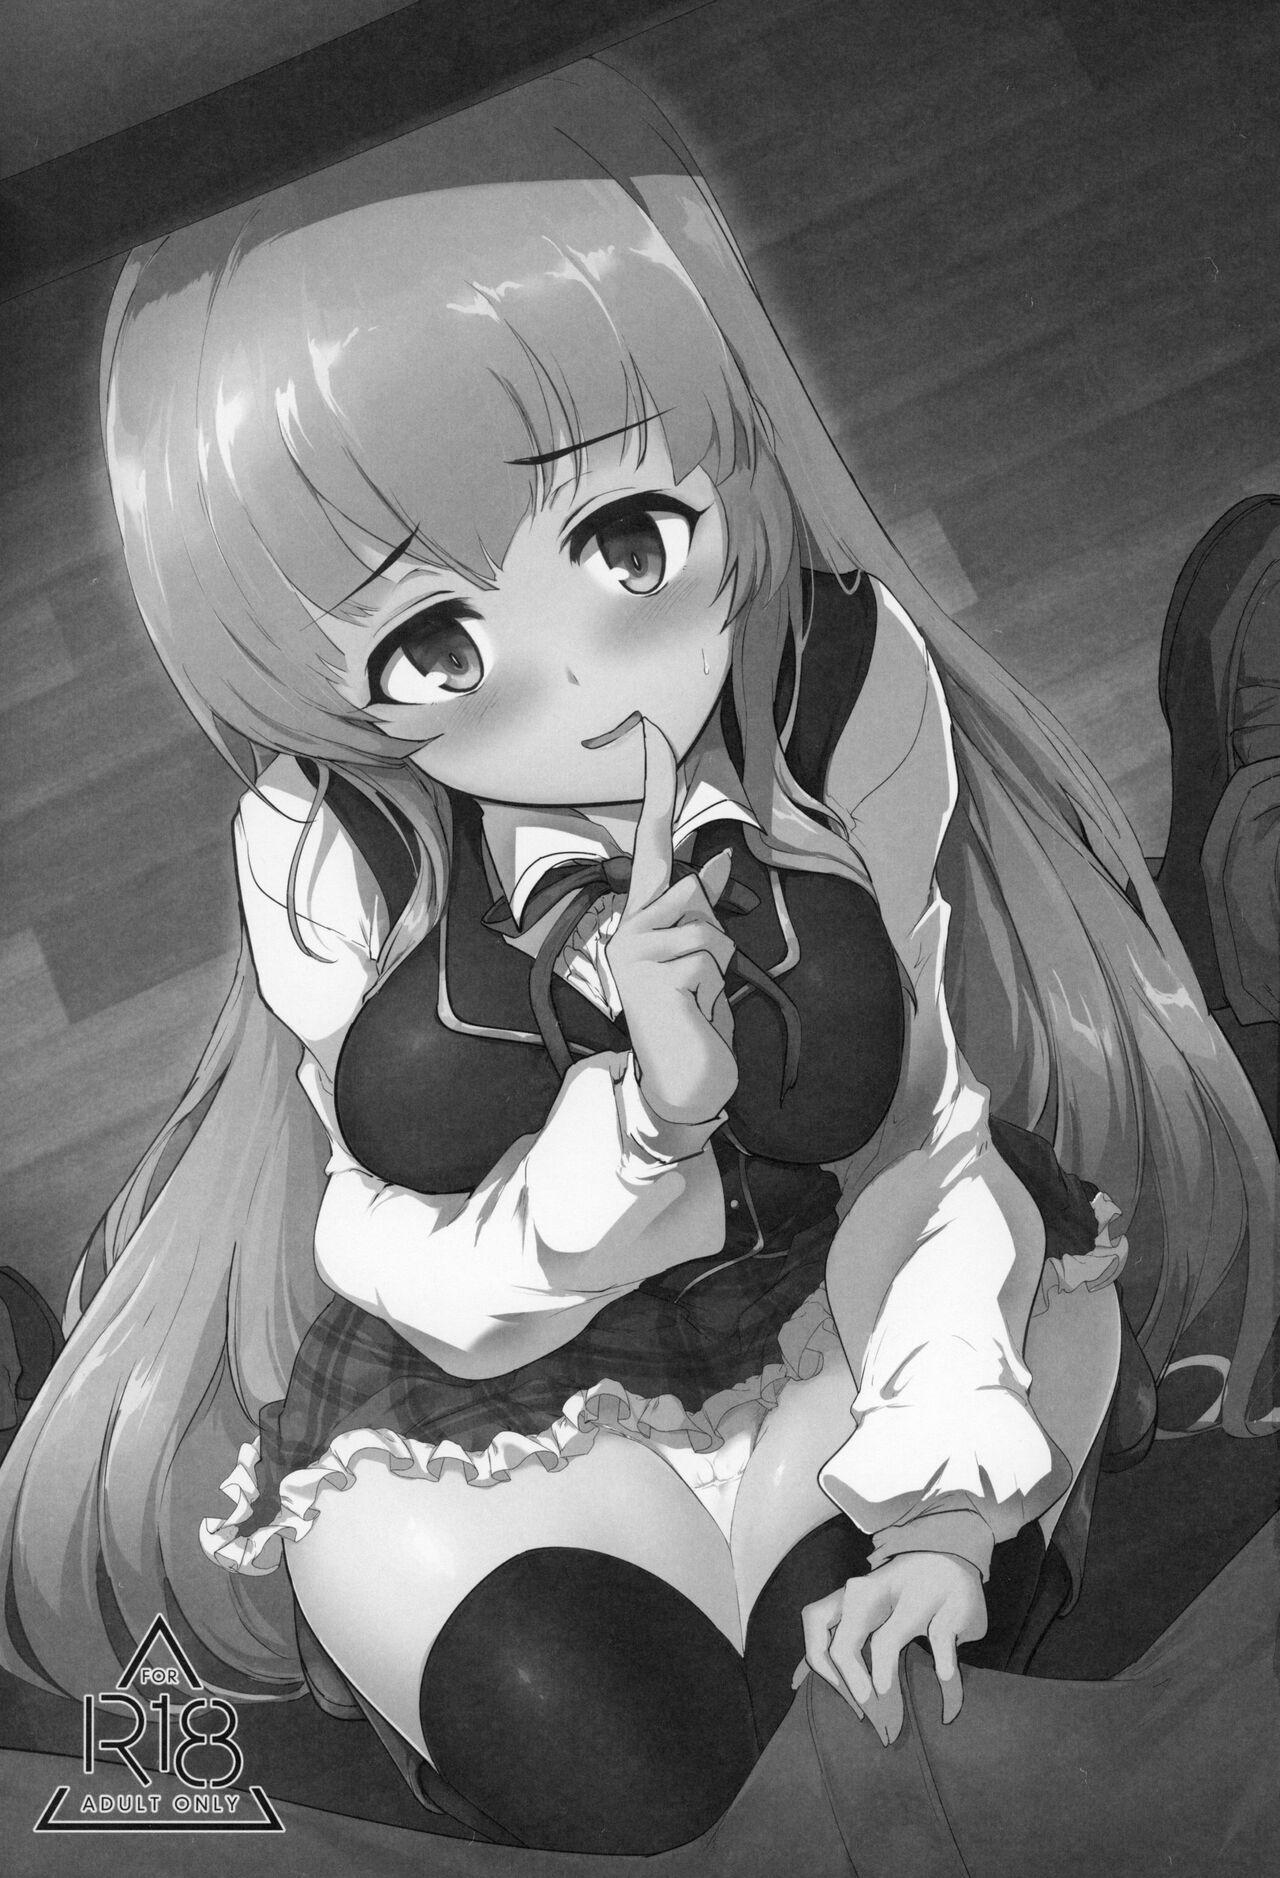 There's No Way An Ecchi Event Will Happen Between Me and the Princess of Manaria Kingdom! 1